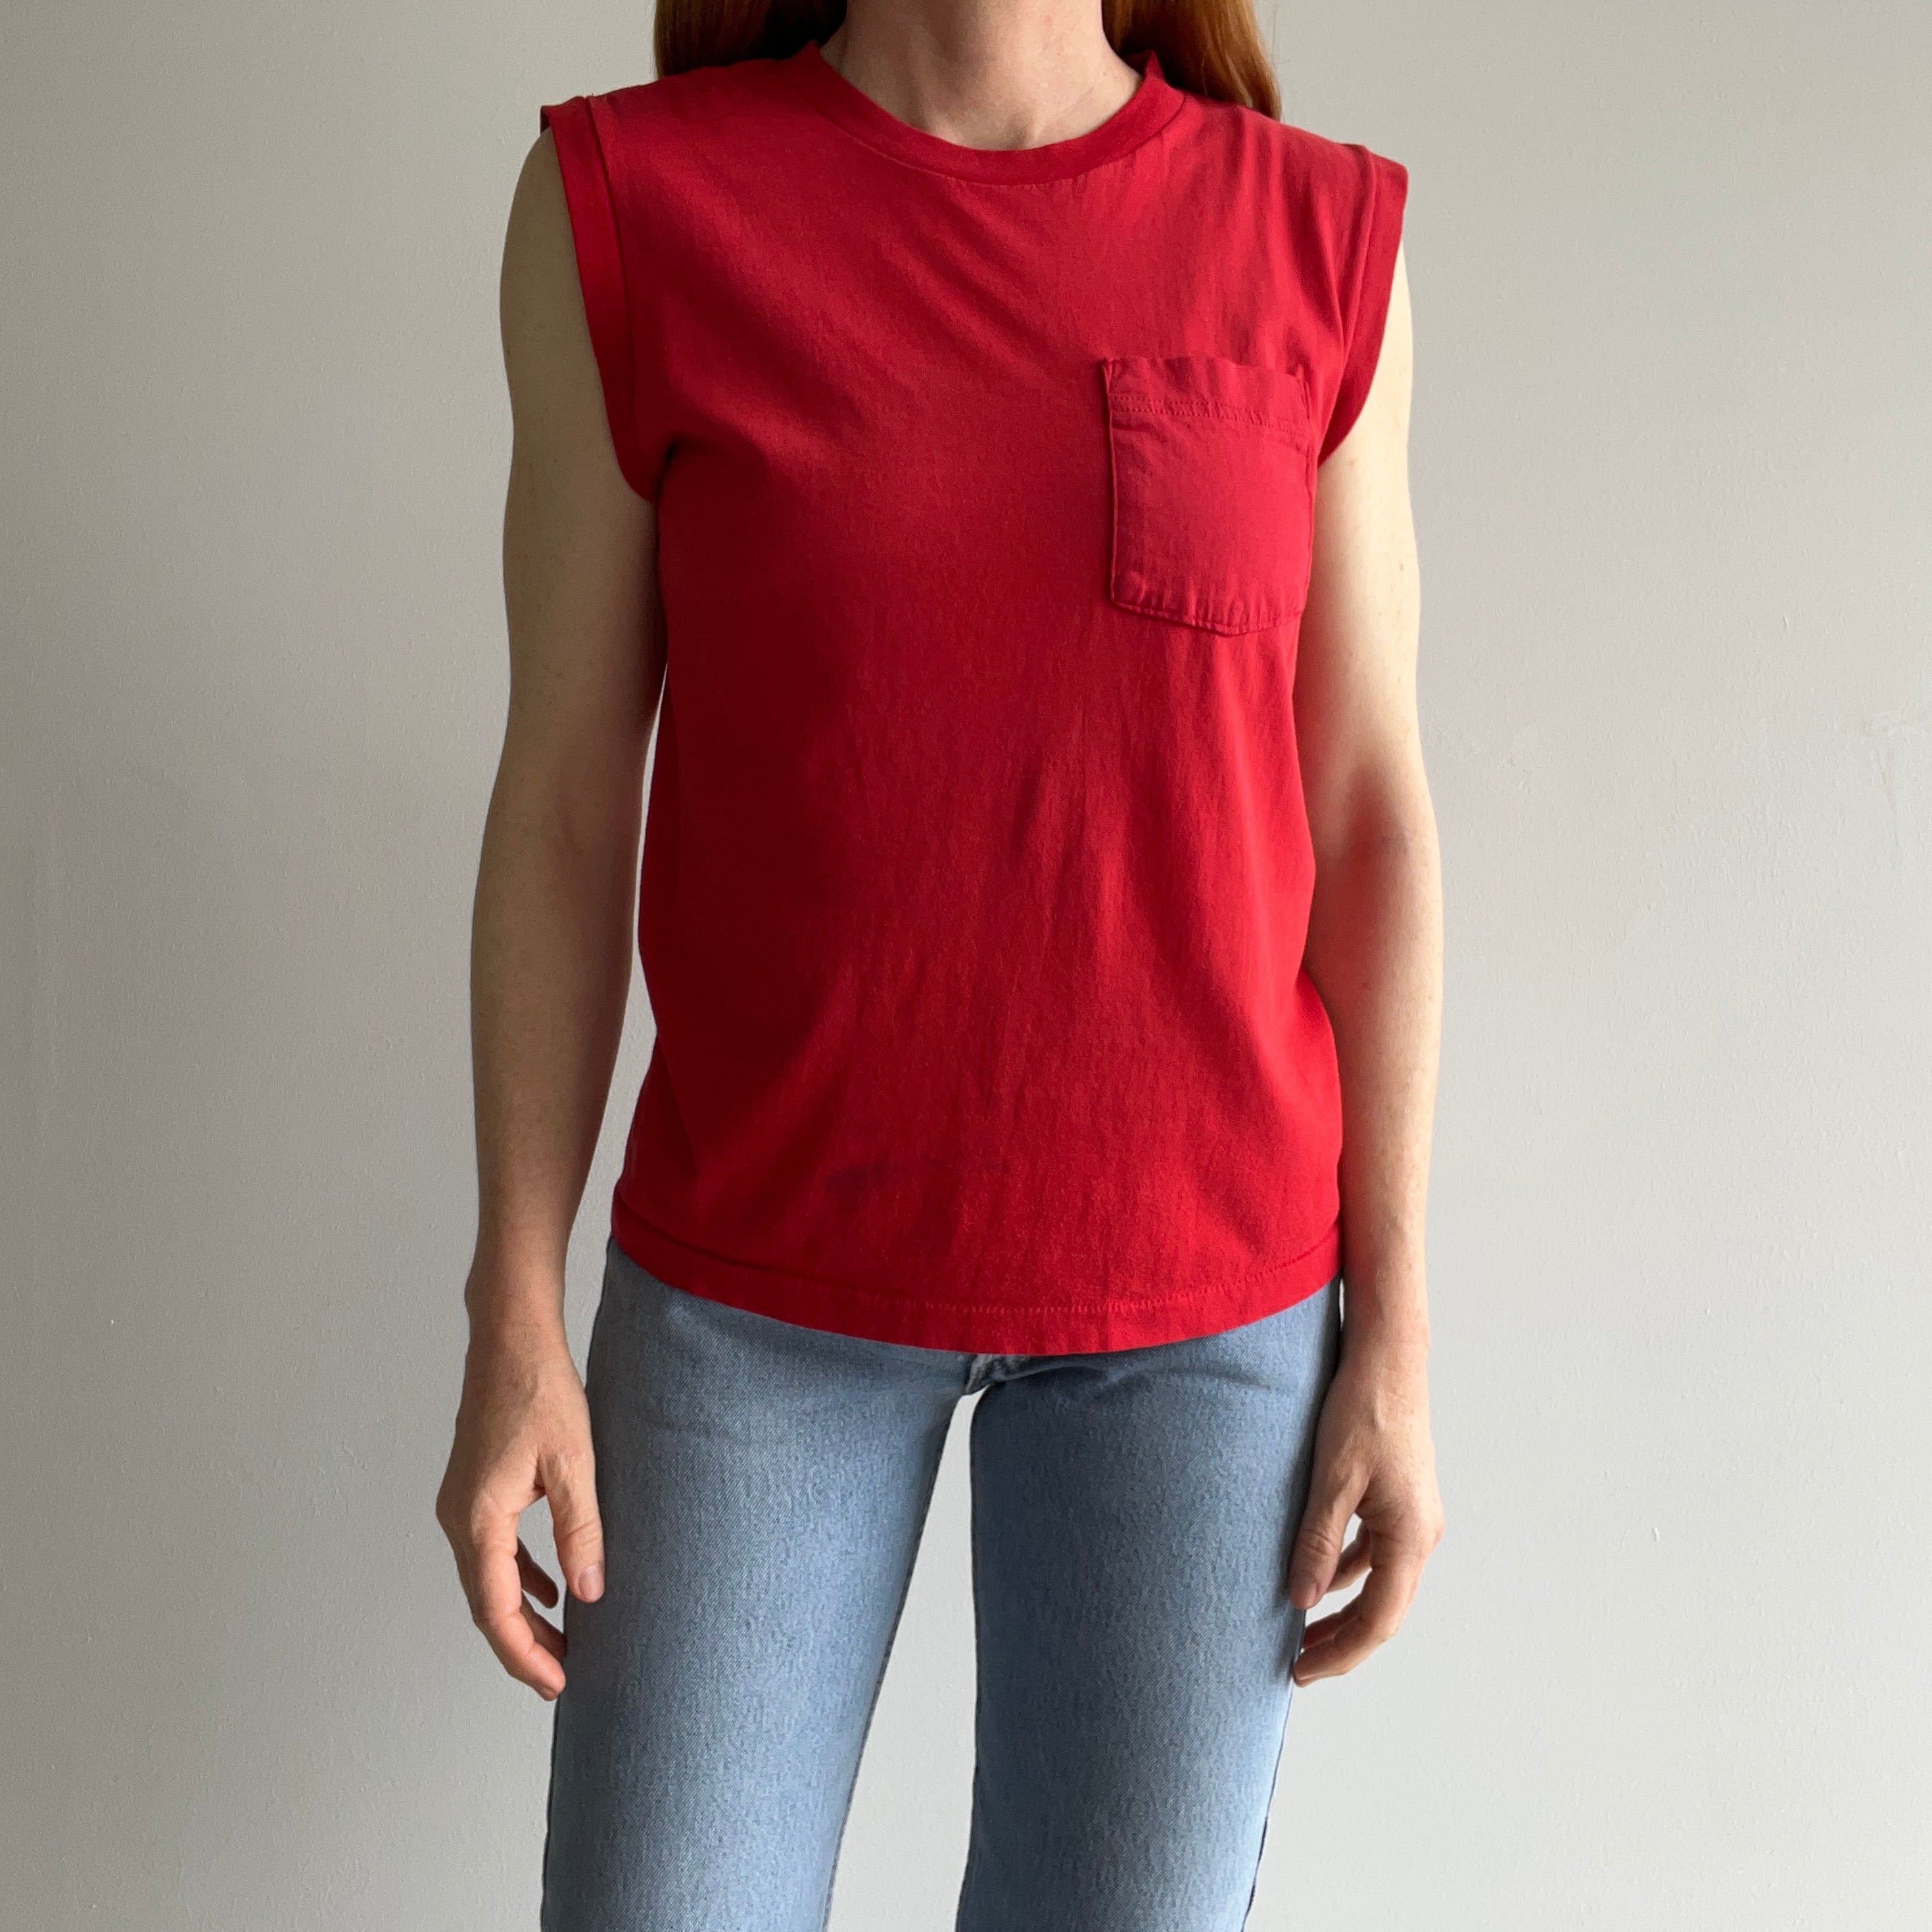 1980s Faded, Worn, Stained Red Muscle Tank by FOTL